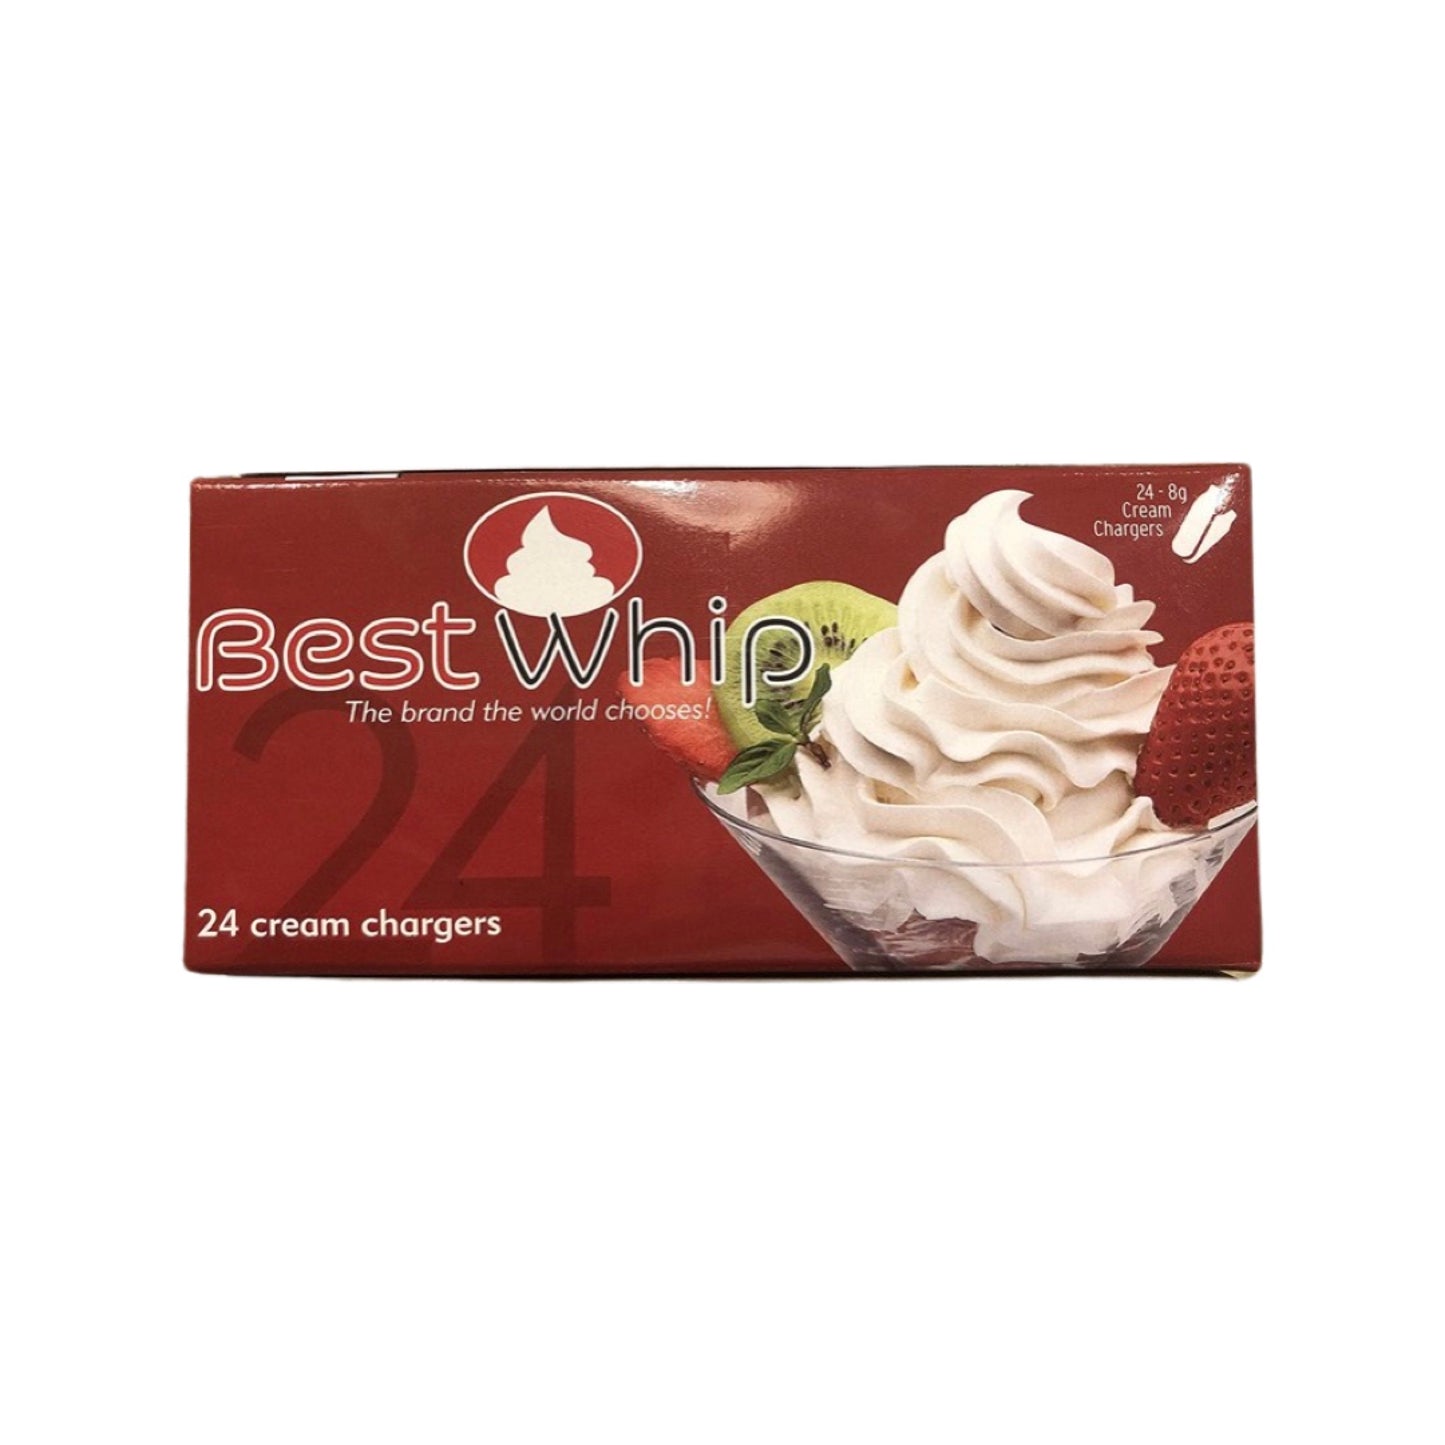 Cream chargers Best whip 24count